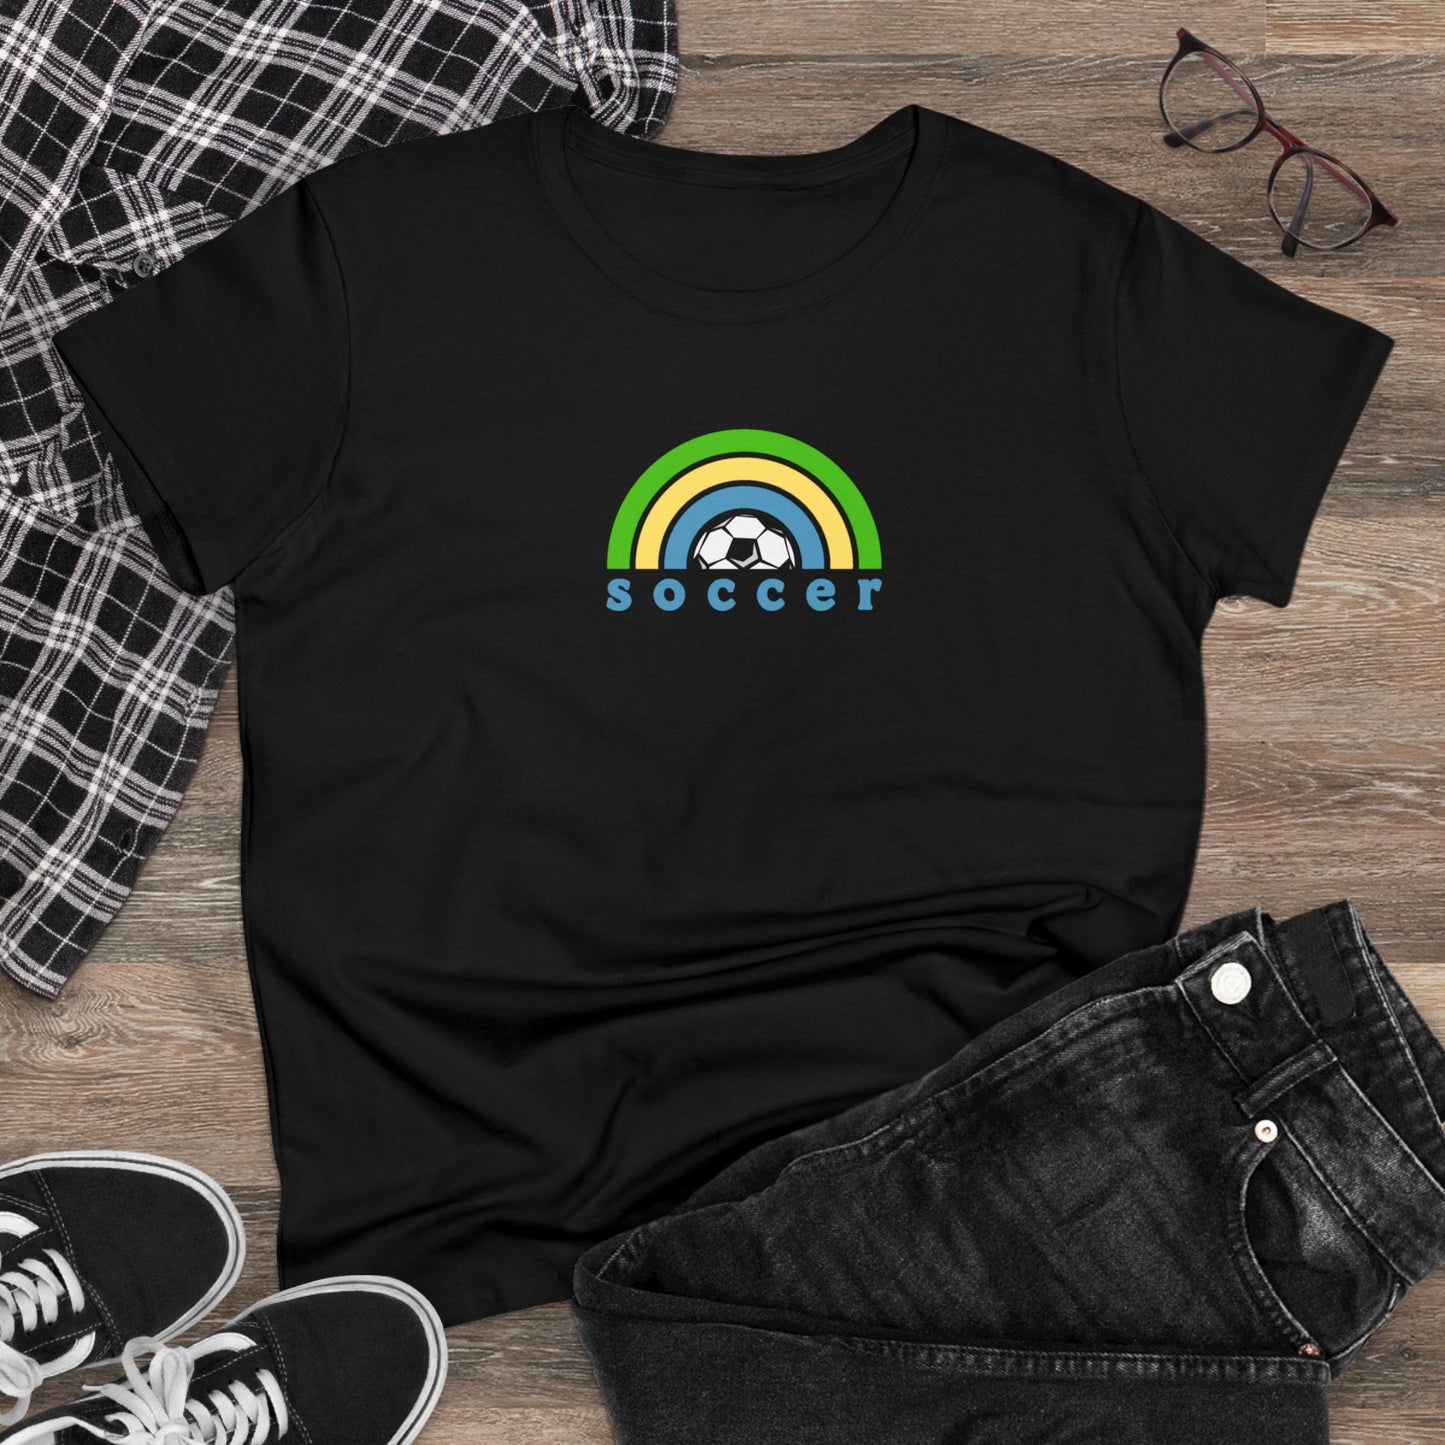 Women's Rainbow Soccer Midweight Cotton Tee, Cute Design, Retro 70's, Pink Basketball T-Shirts for Ladies, Love of Soccer